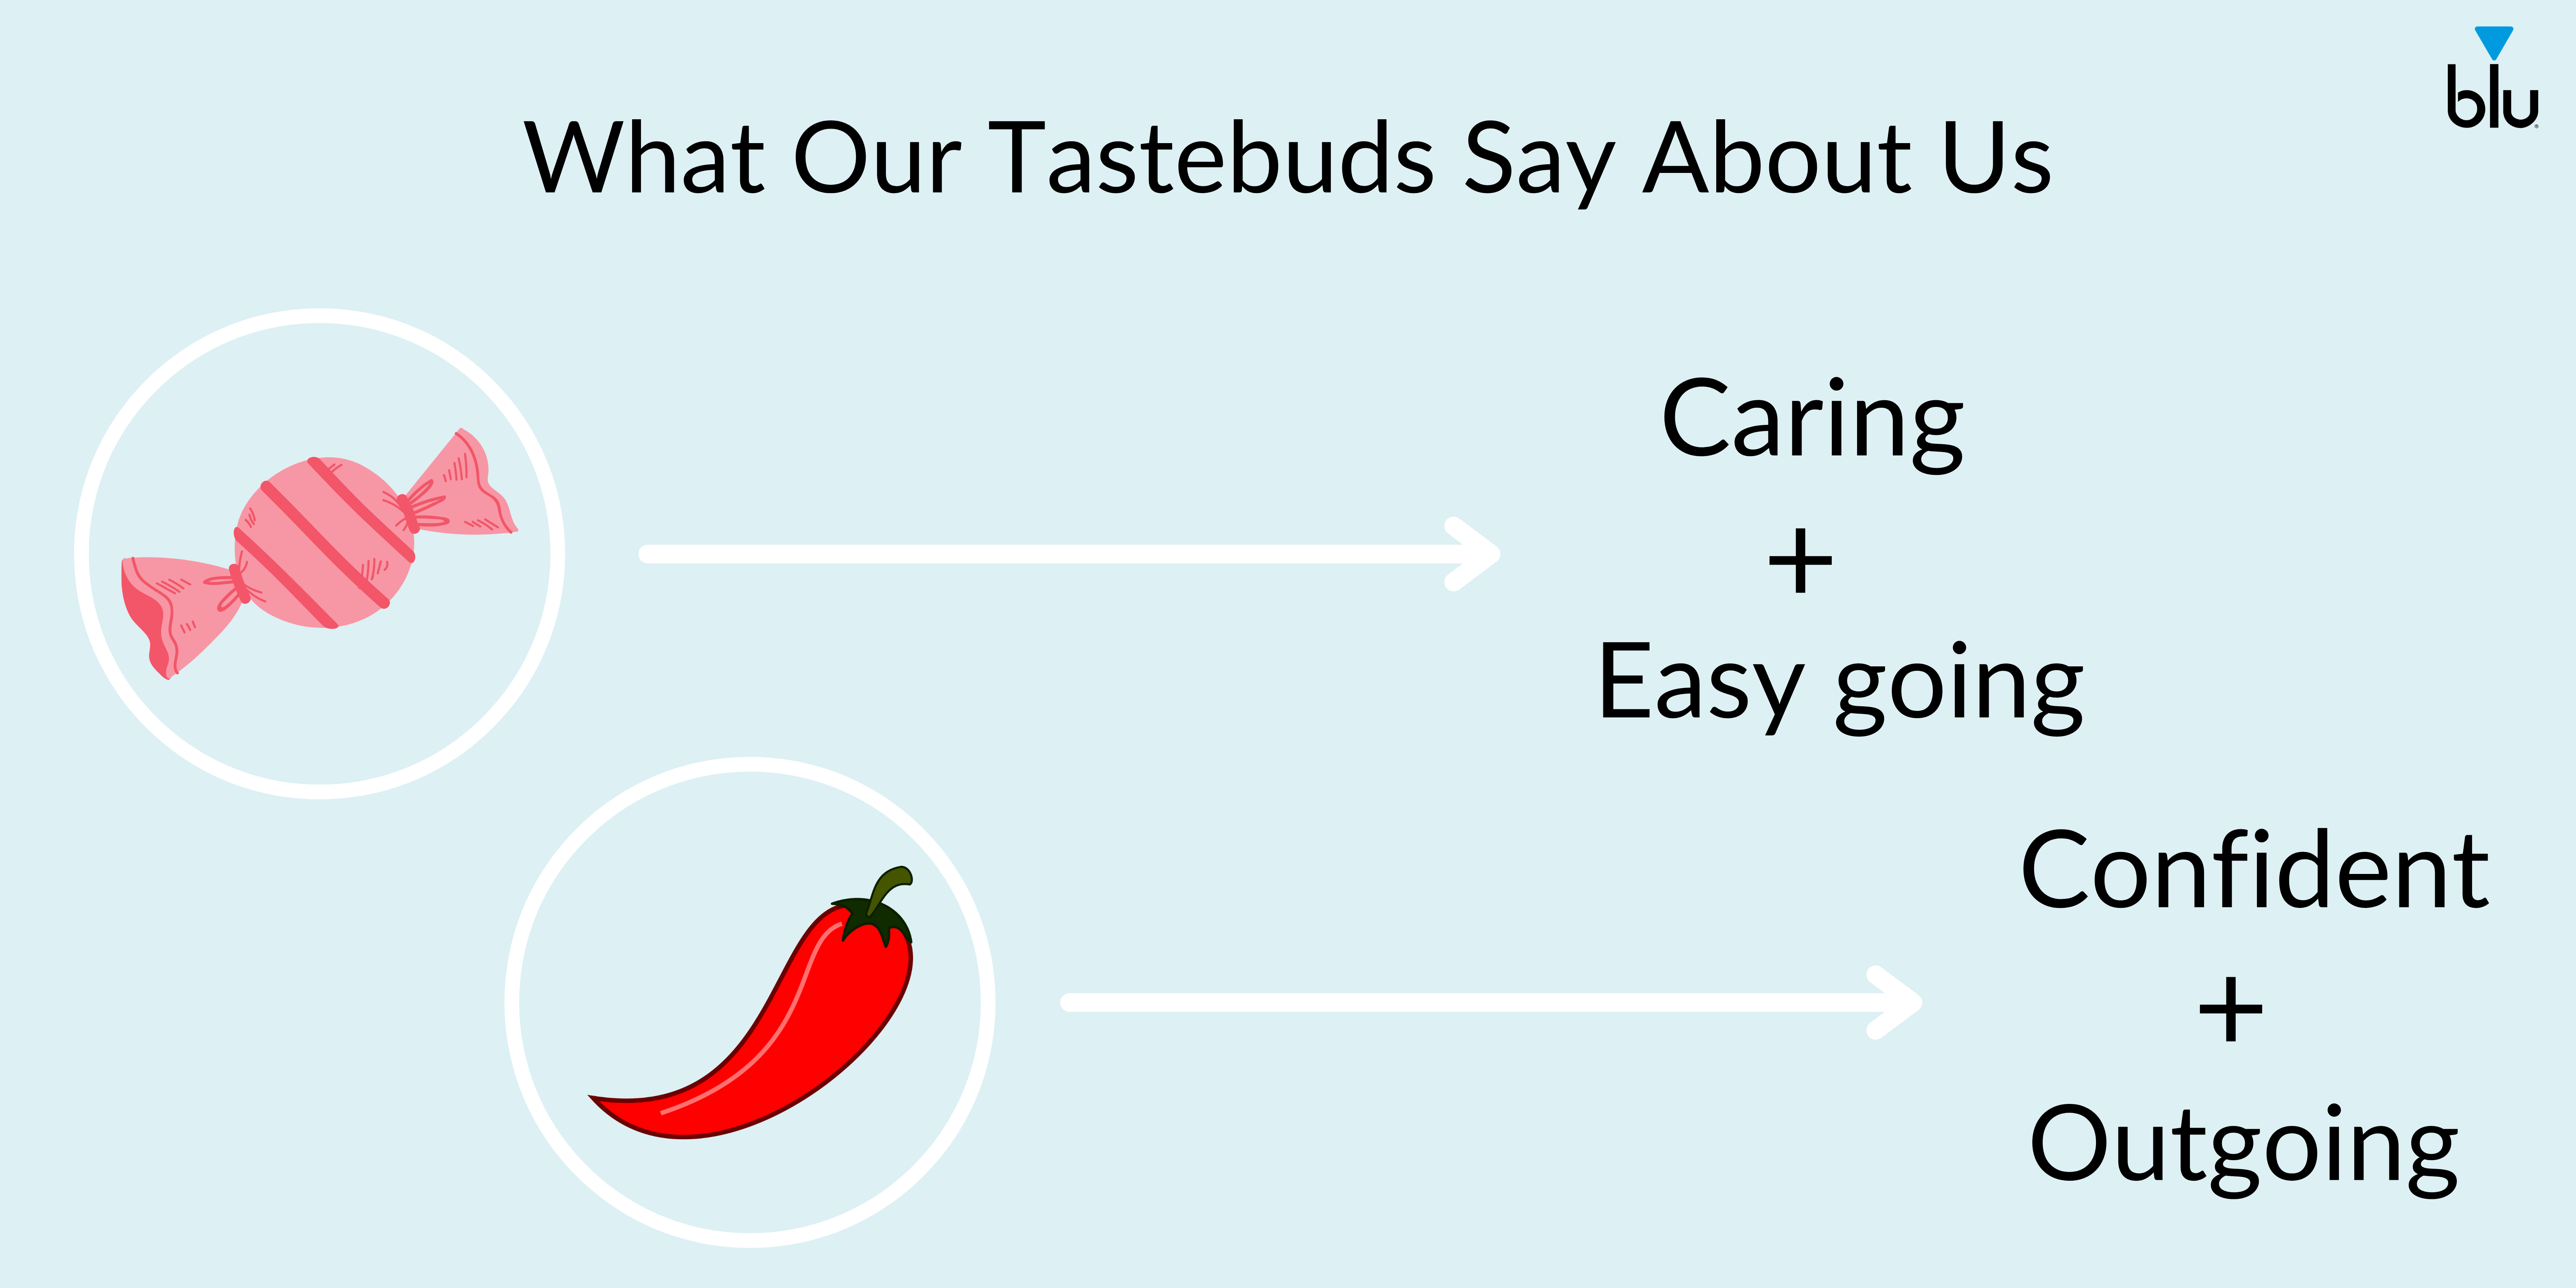 What Our Tastebuds Say About Us